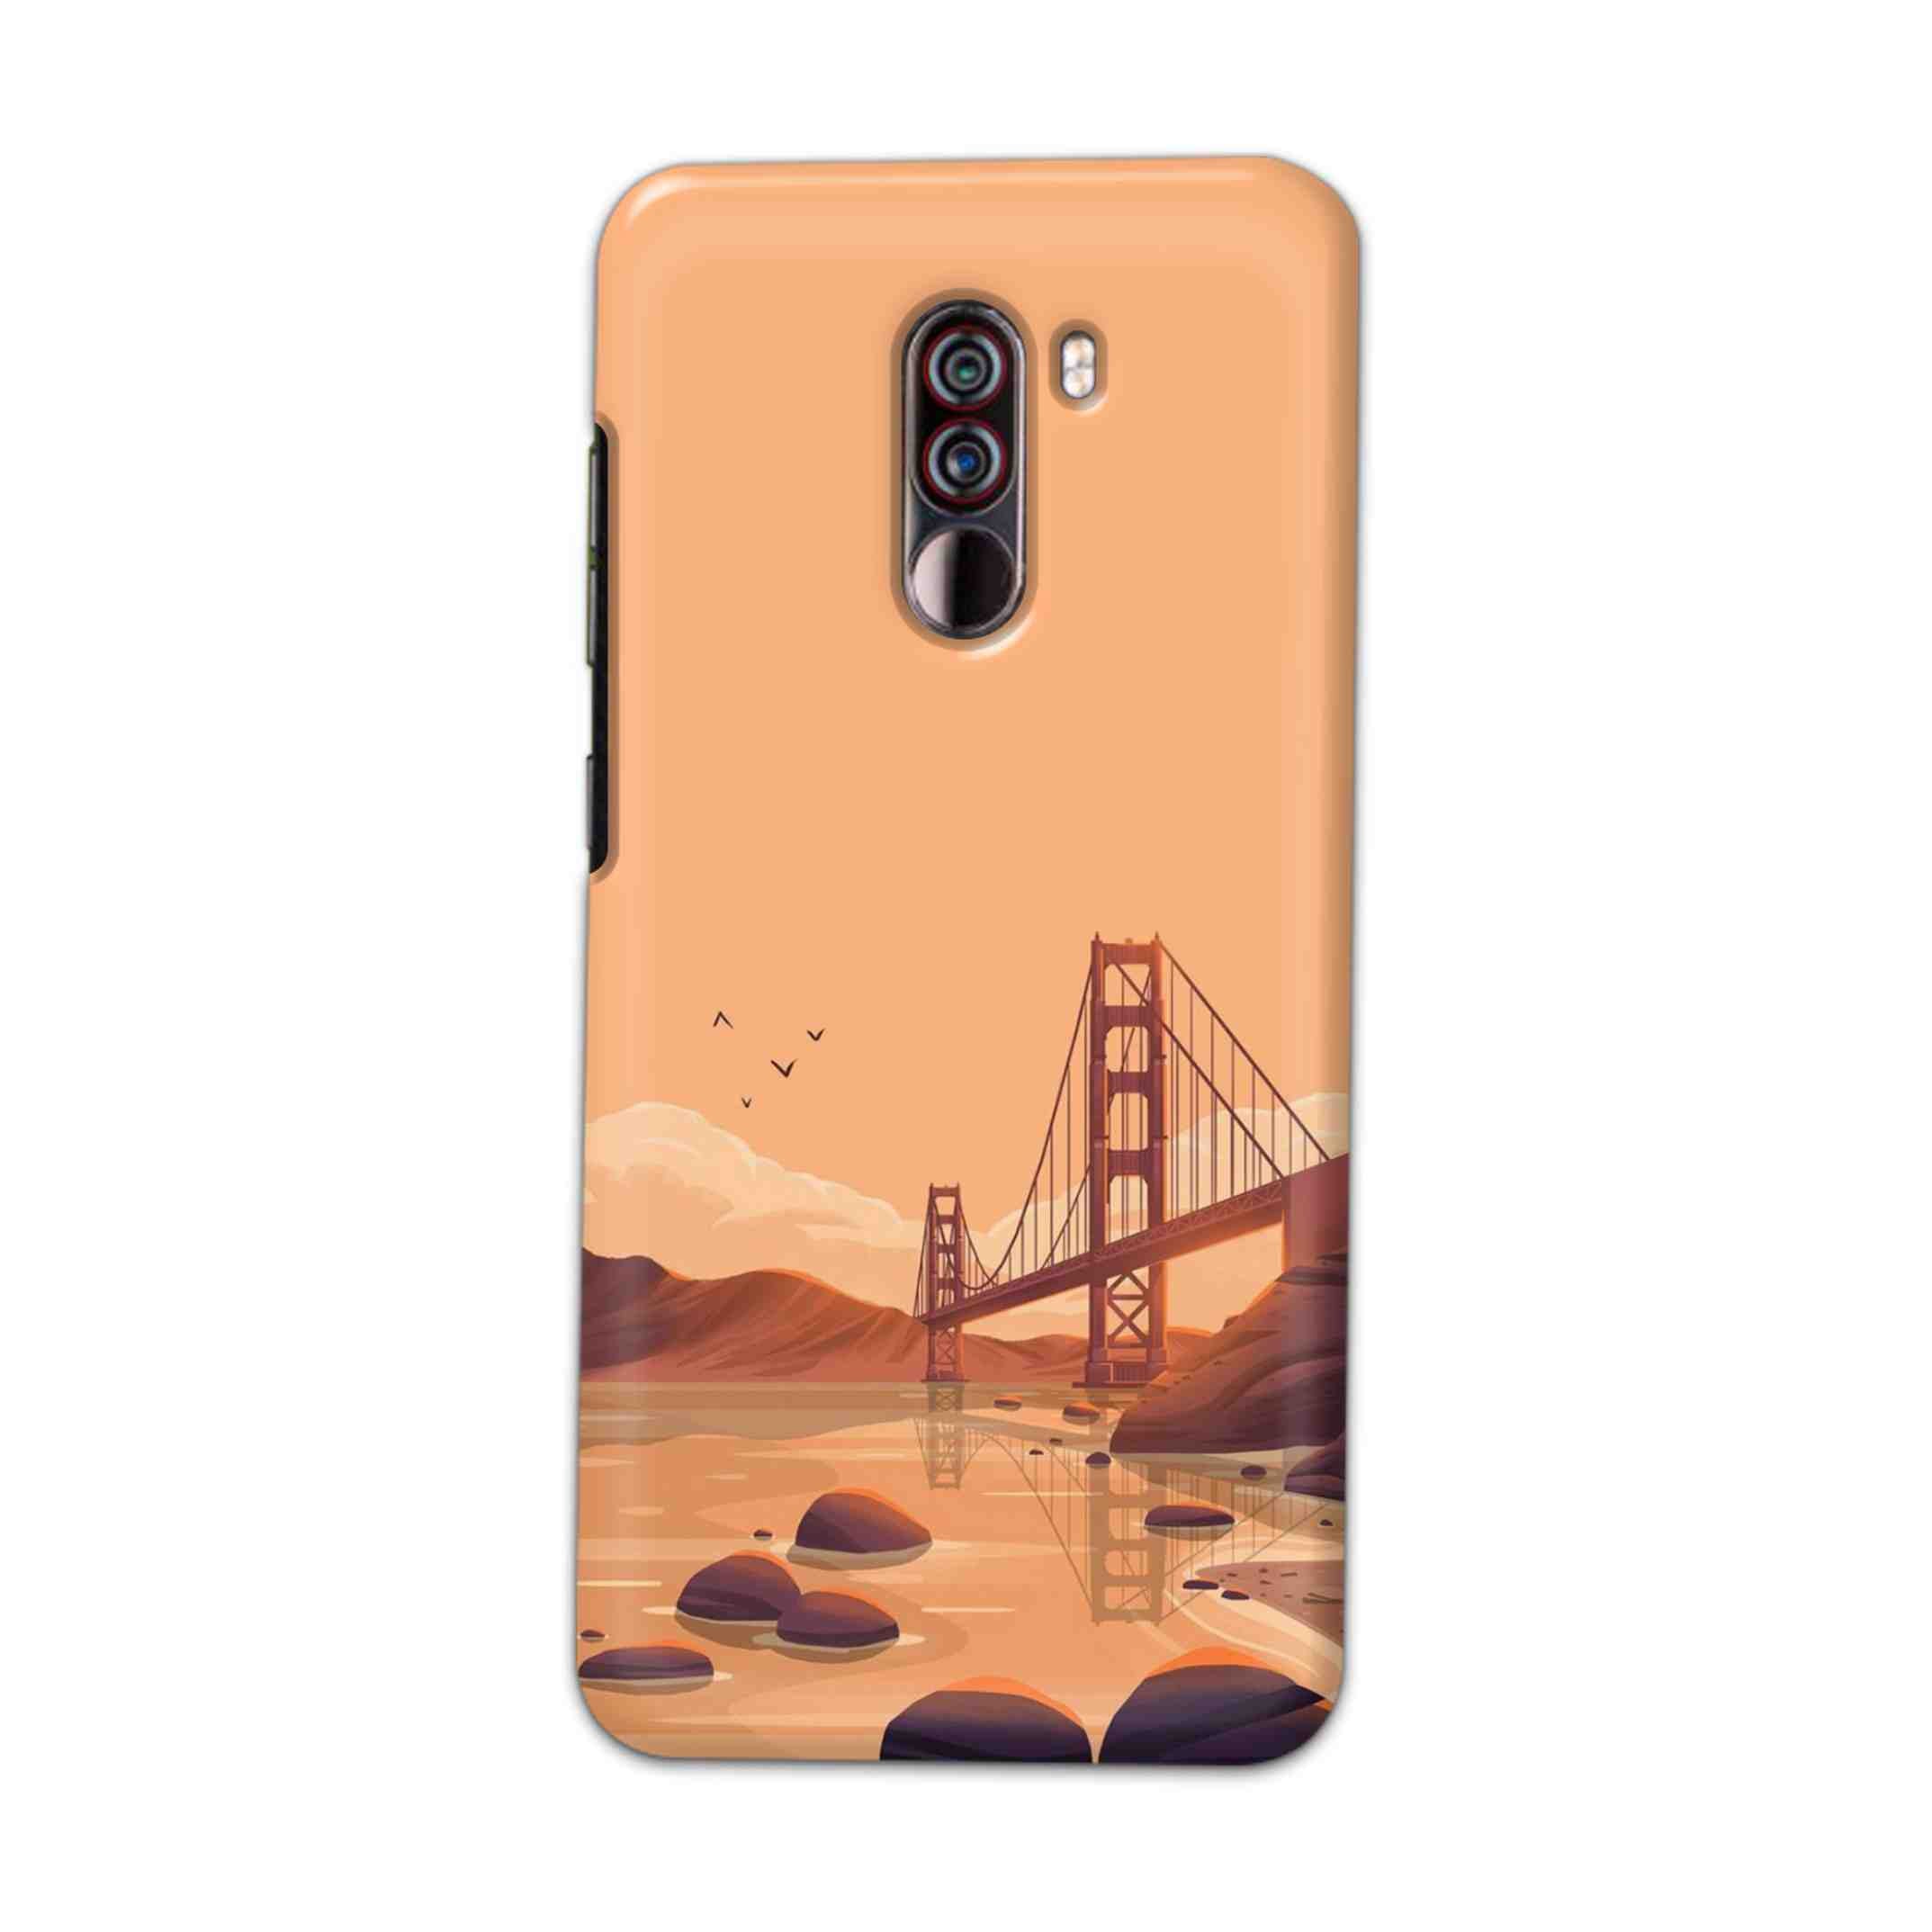 Buy San Francisco Hard Back Mobile Phone Case Cover For Xiaomi Pocophone F1 Online